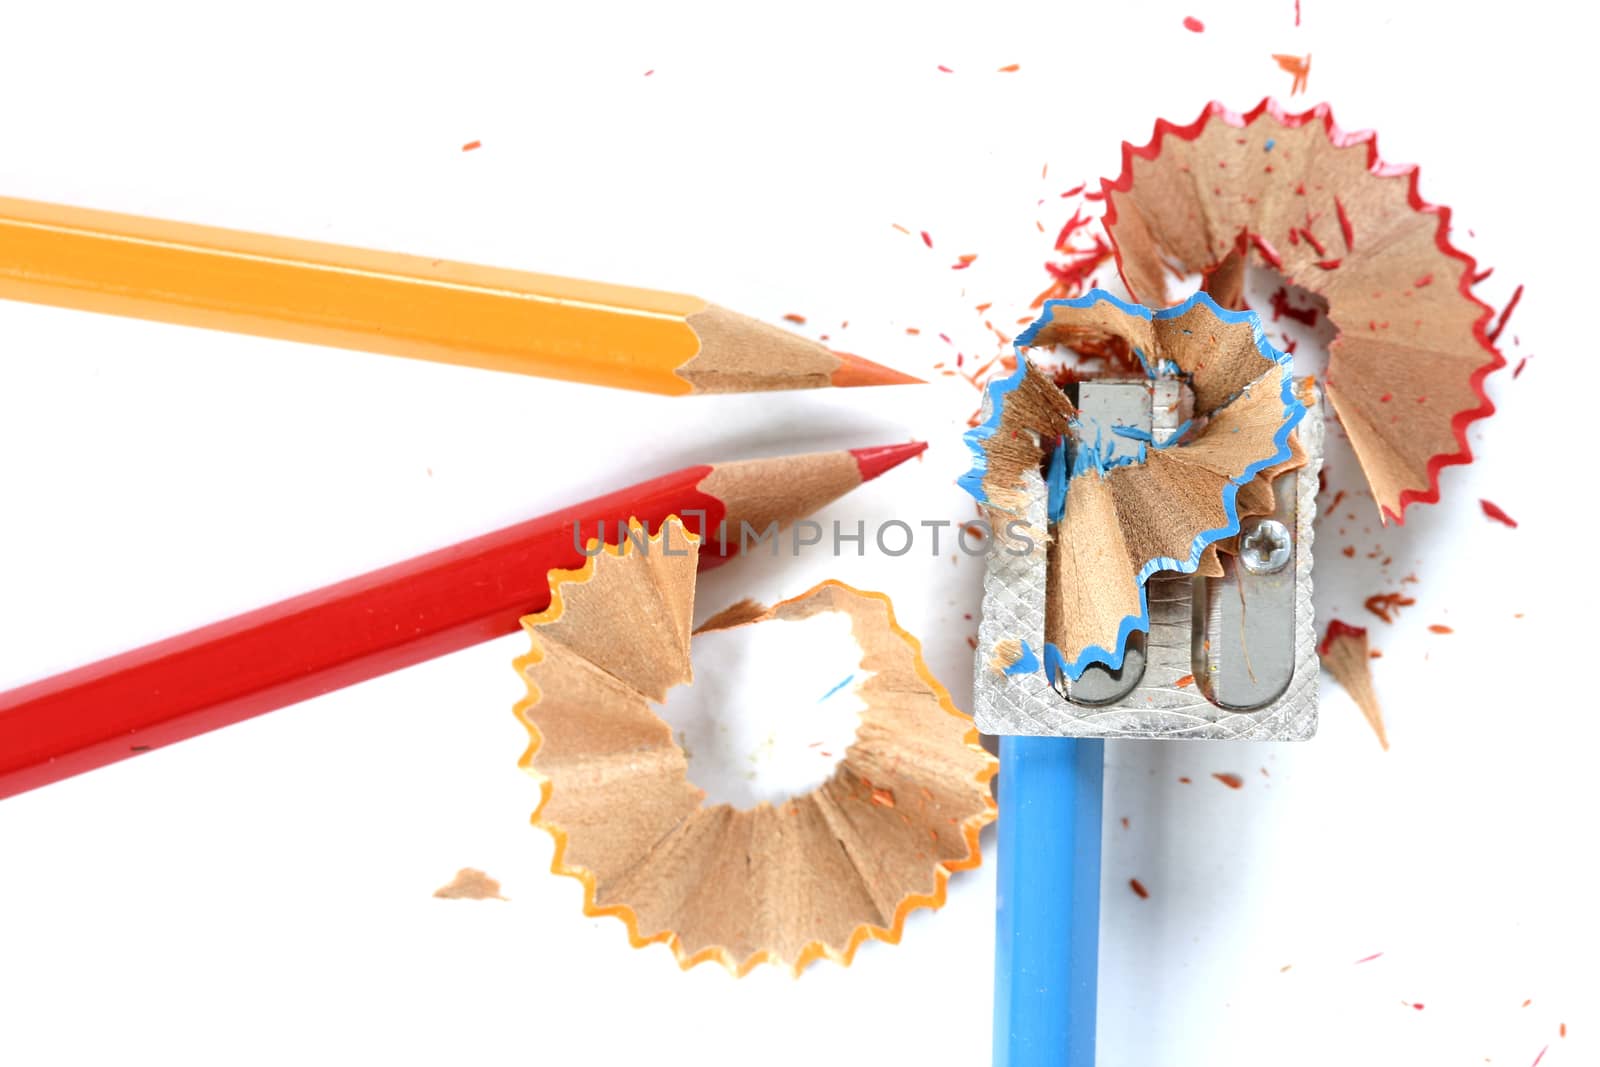 Close-up of pencils and sharpener.